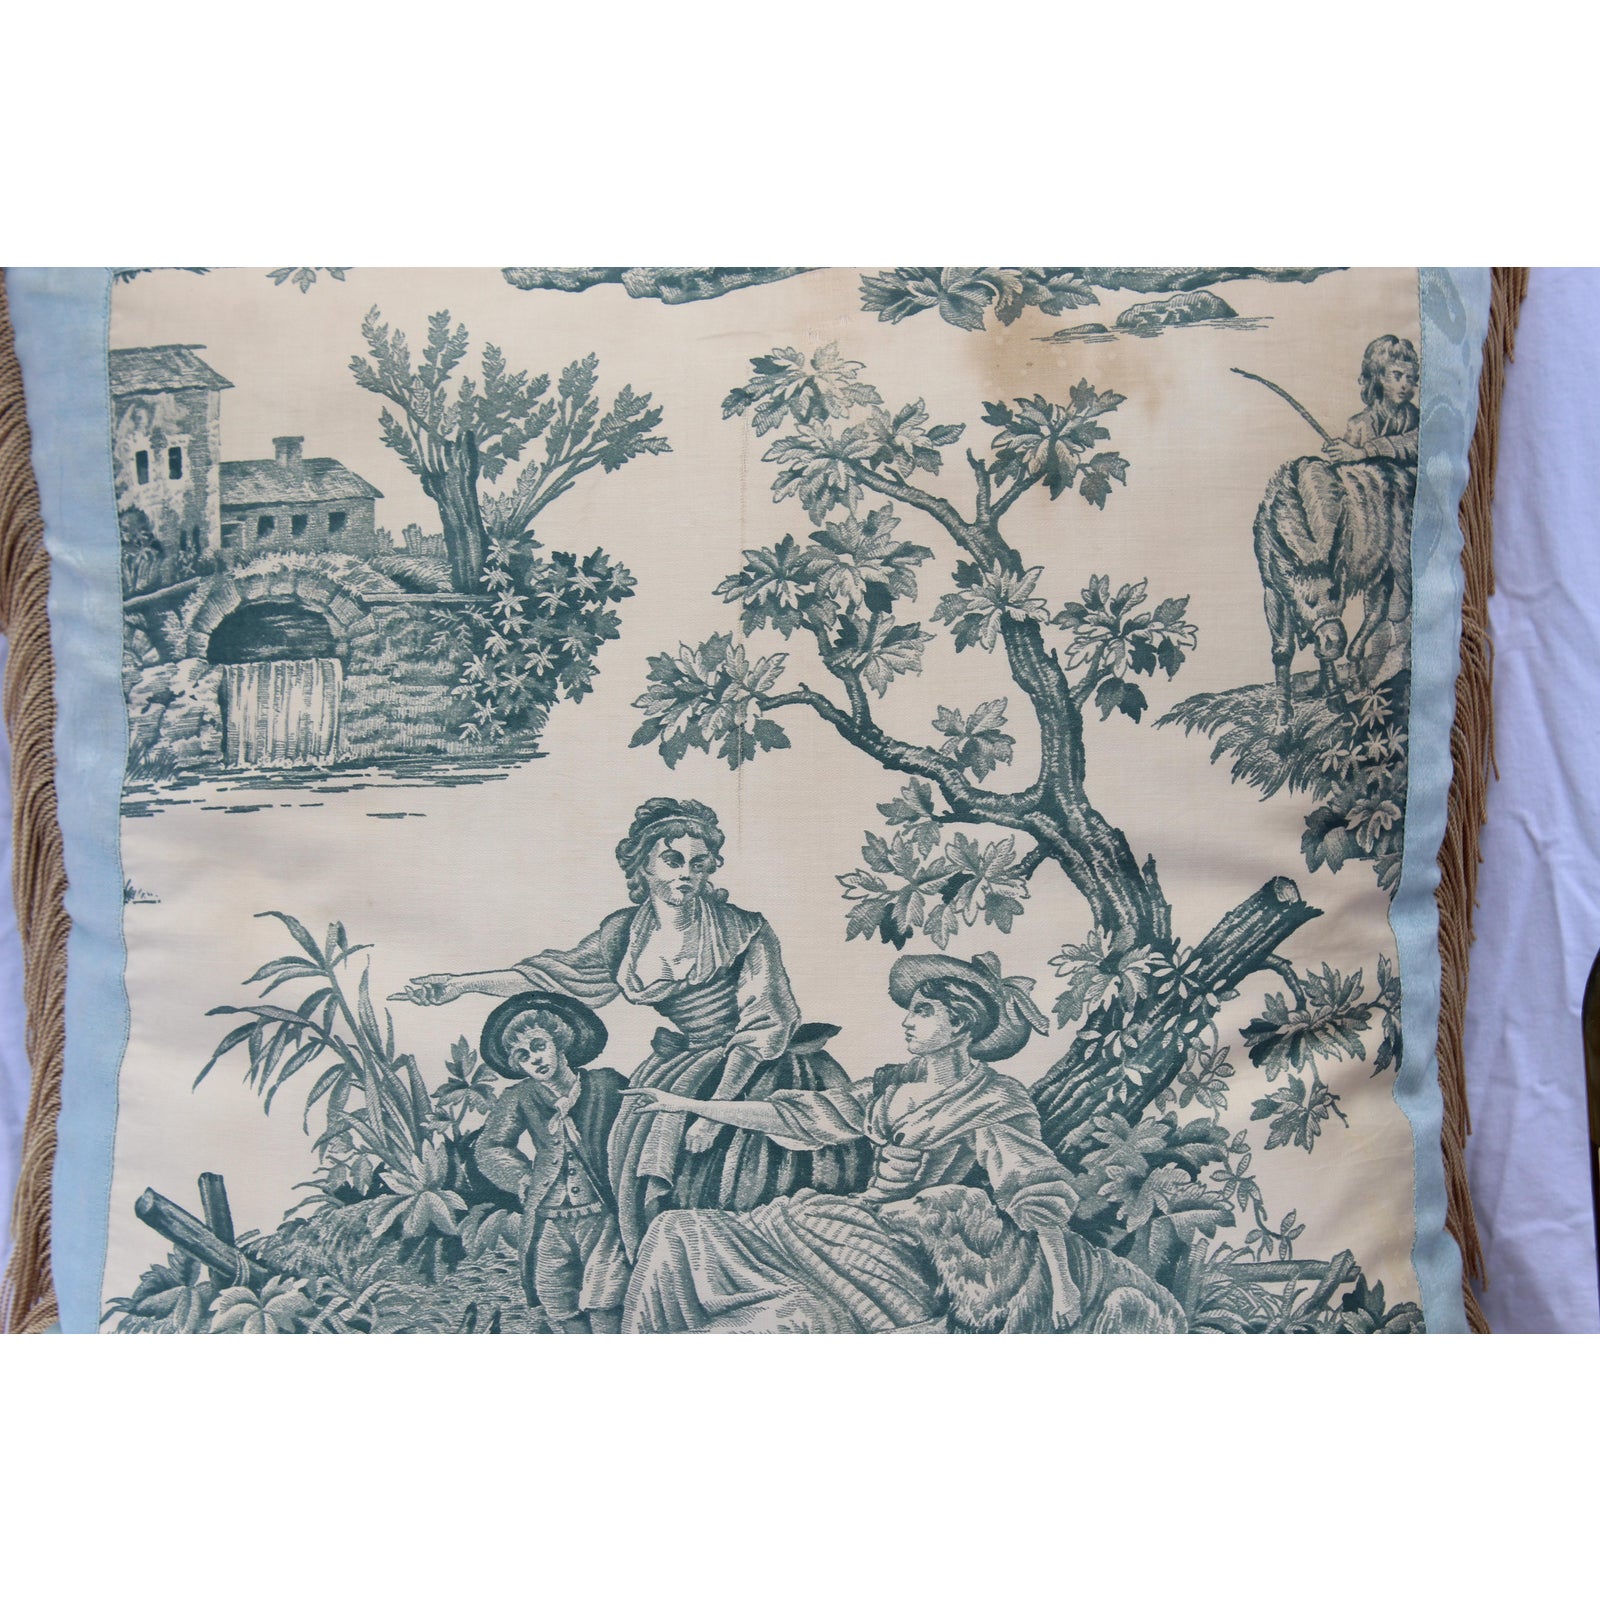 20th-century-french-blue-toile-very-soft-down-pillow-8531